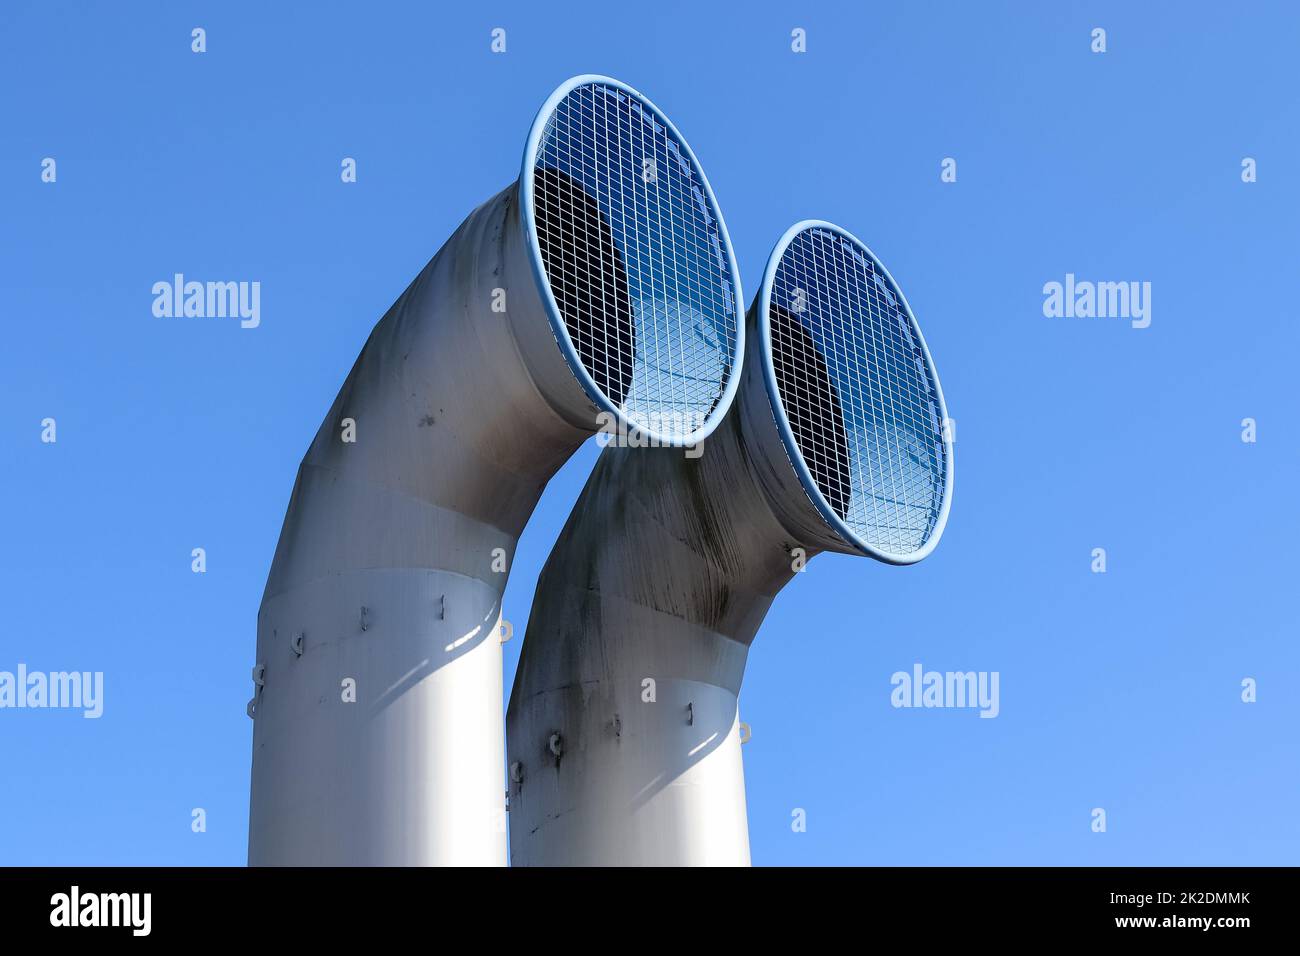 Two large chimney pipes with grids in front of them taken from below. Stock Photo